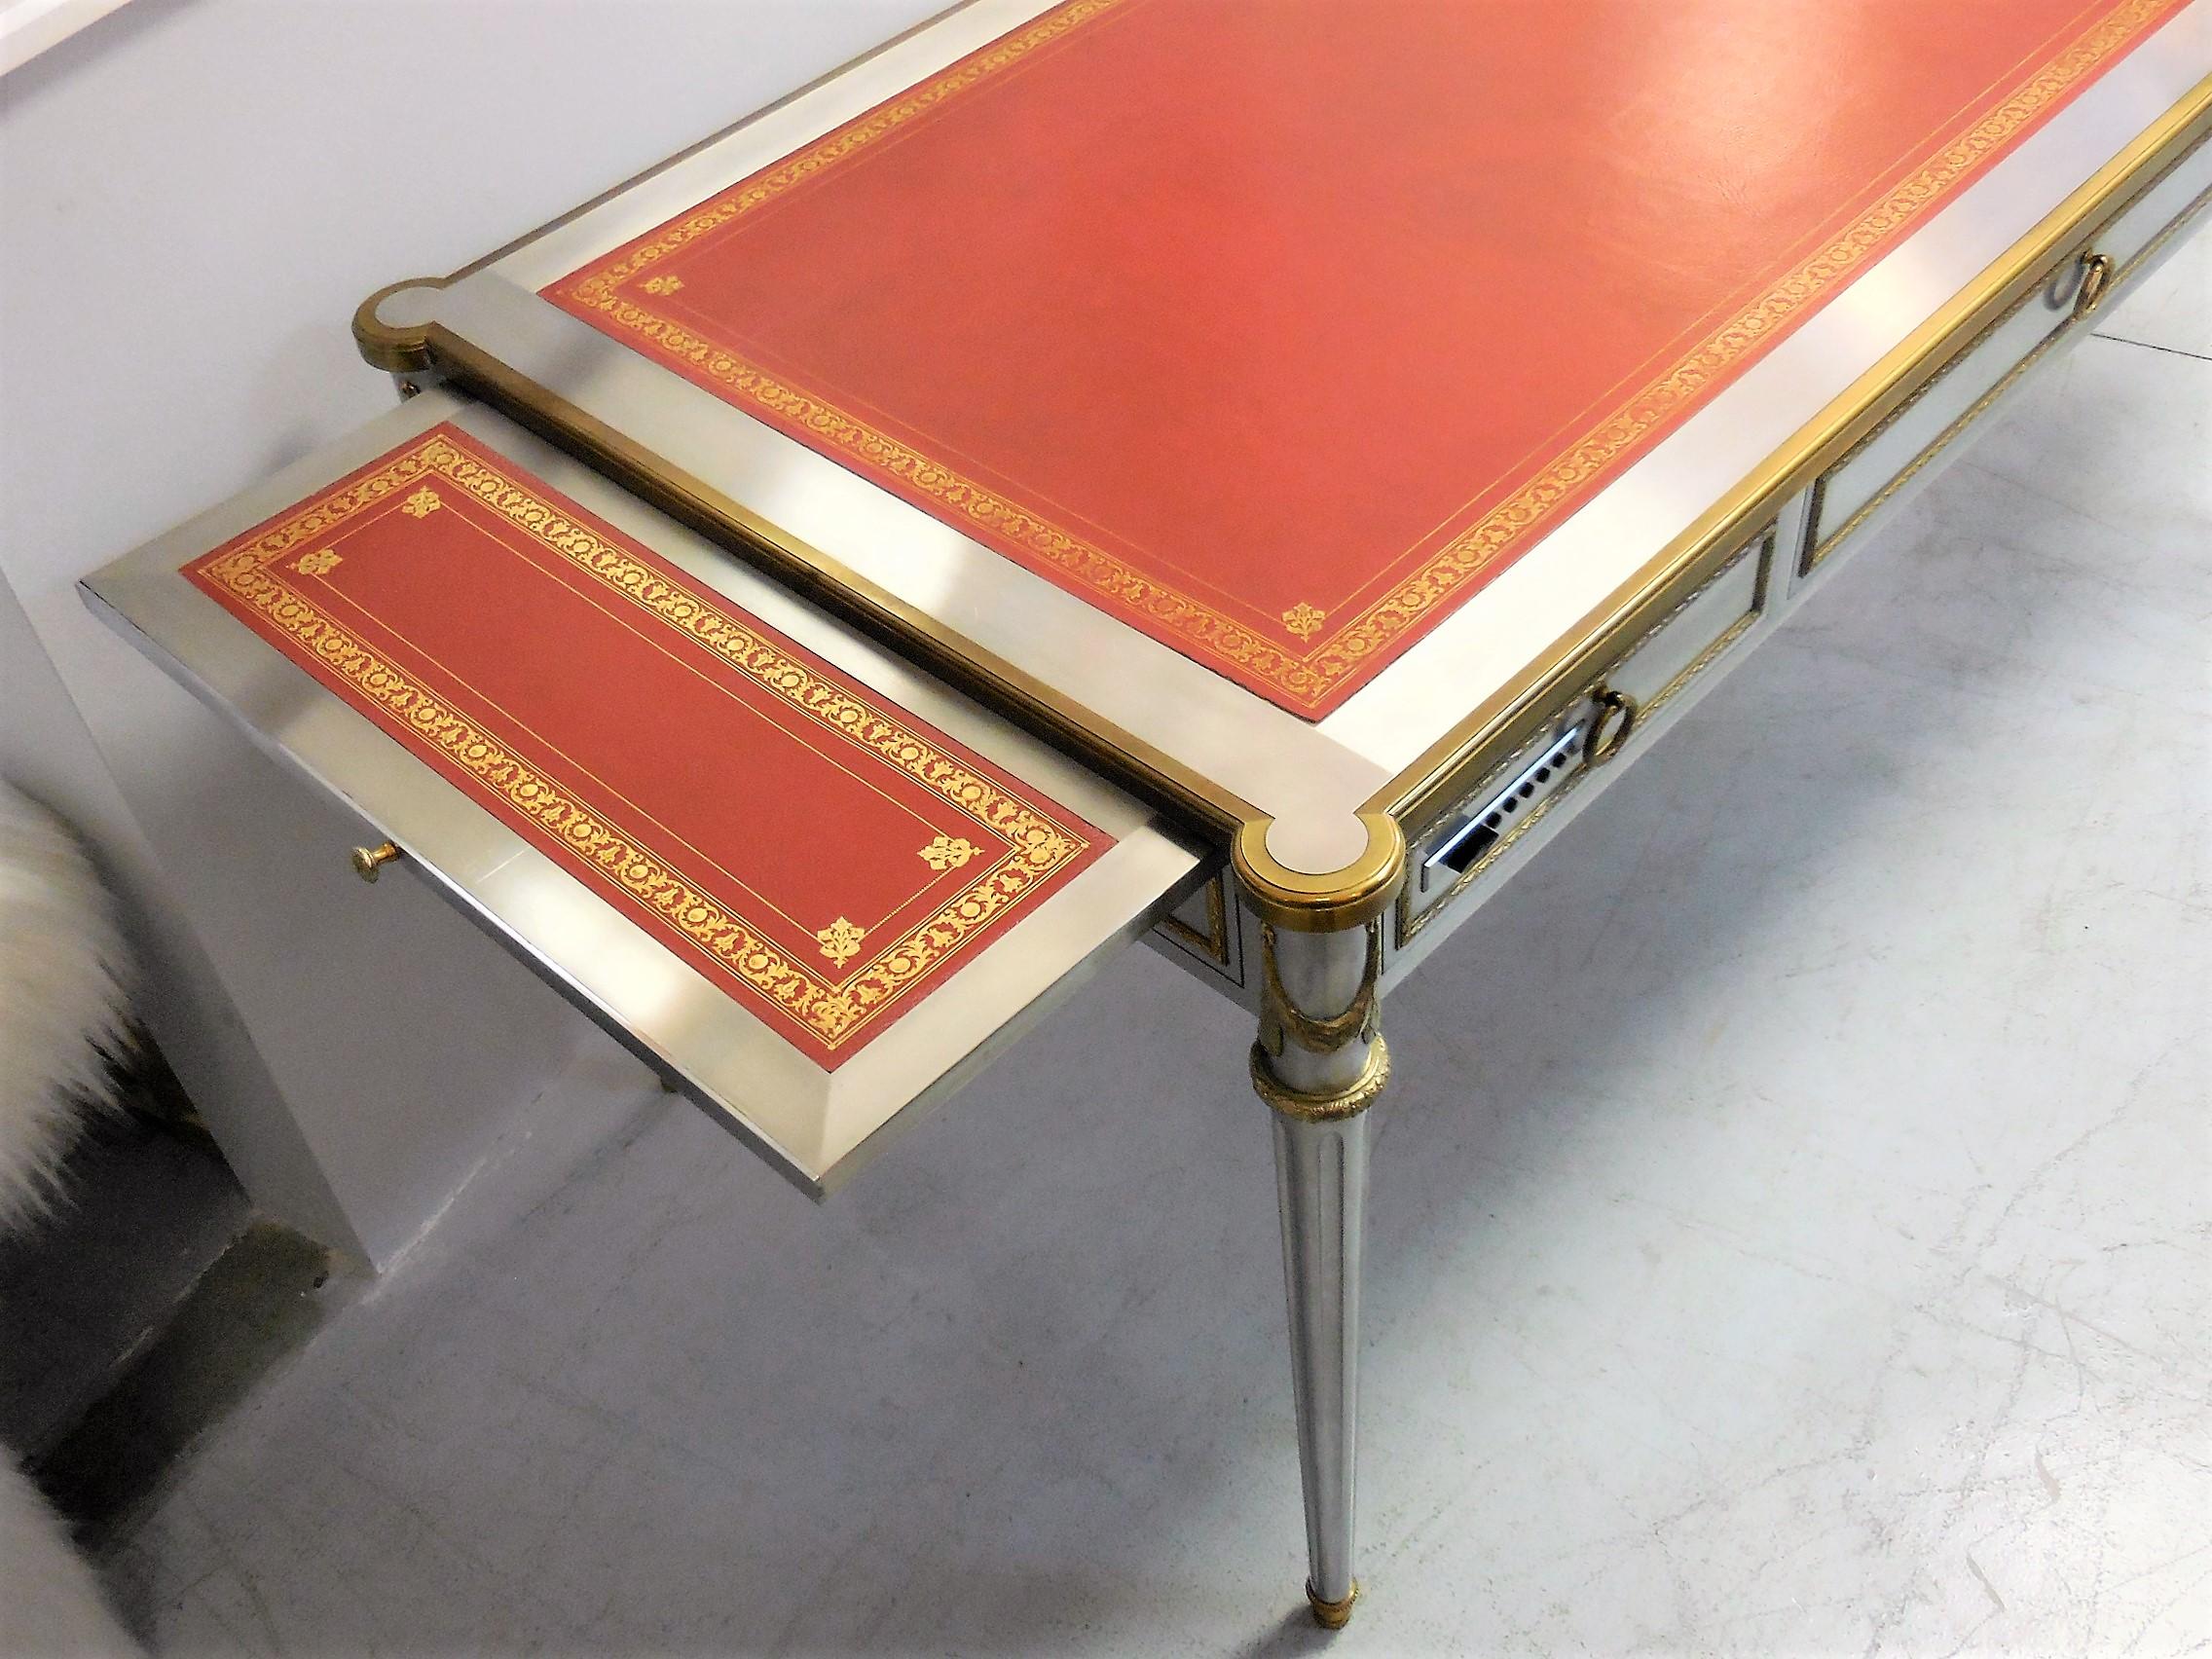 Brushed John Vesey V-60 Stainless Steel Bronze and Red Leather Desk, 1960s For Sale